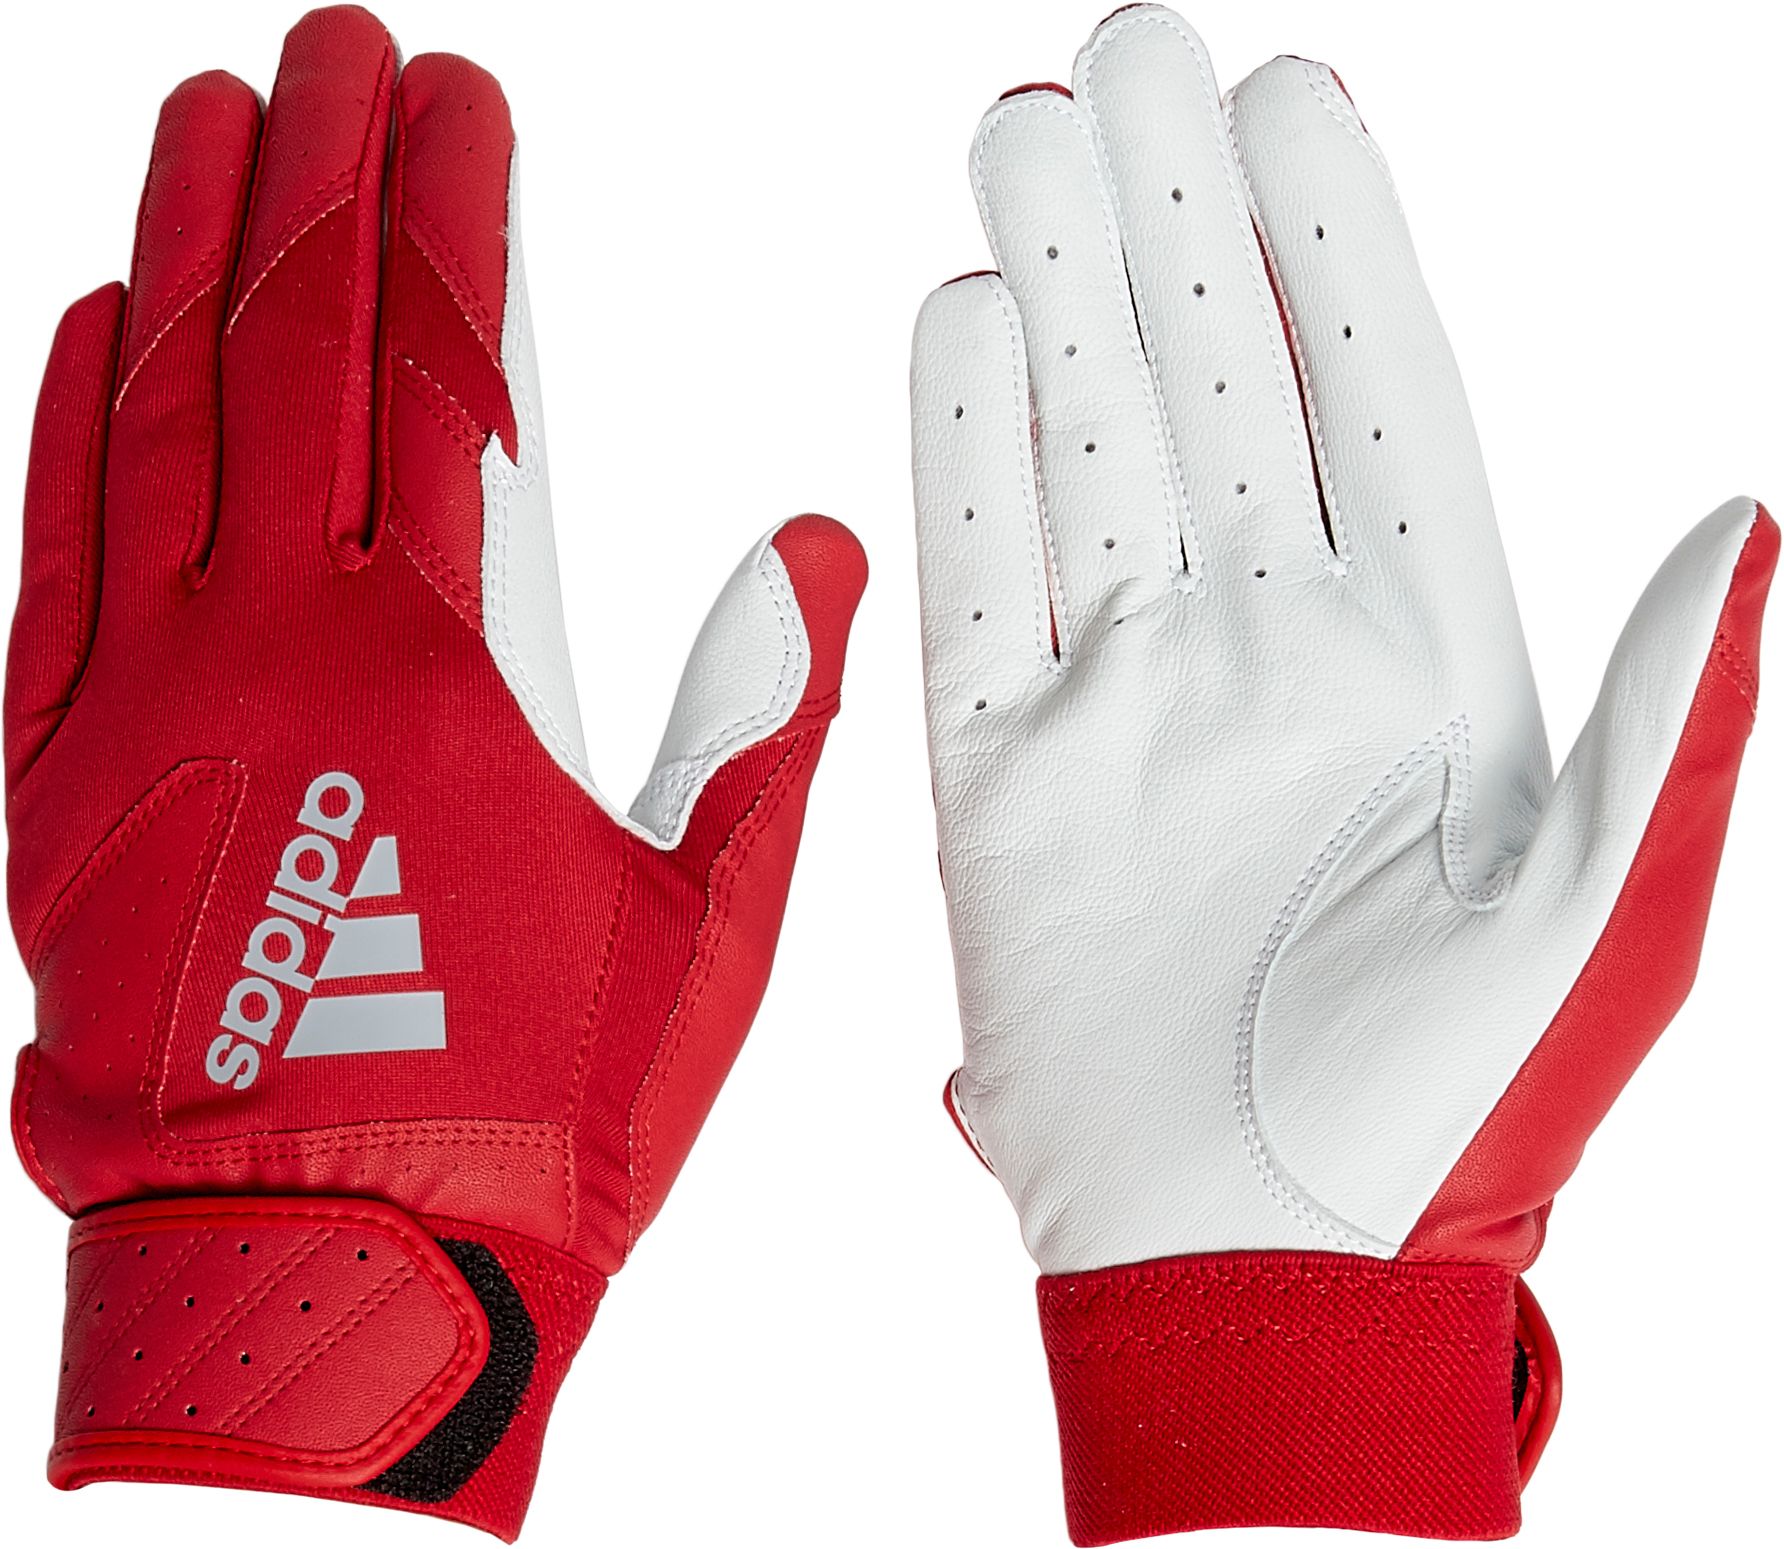 red adidas gloves